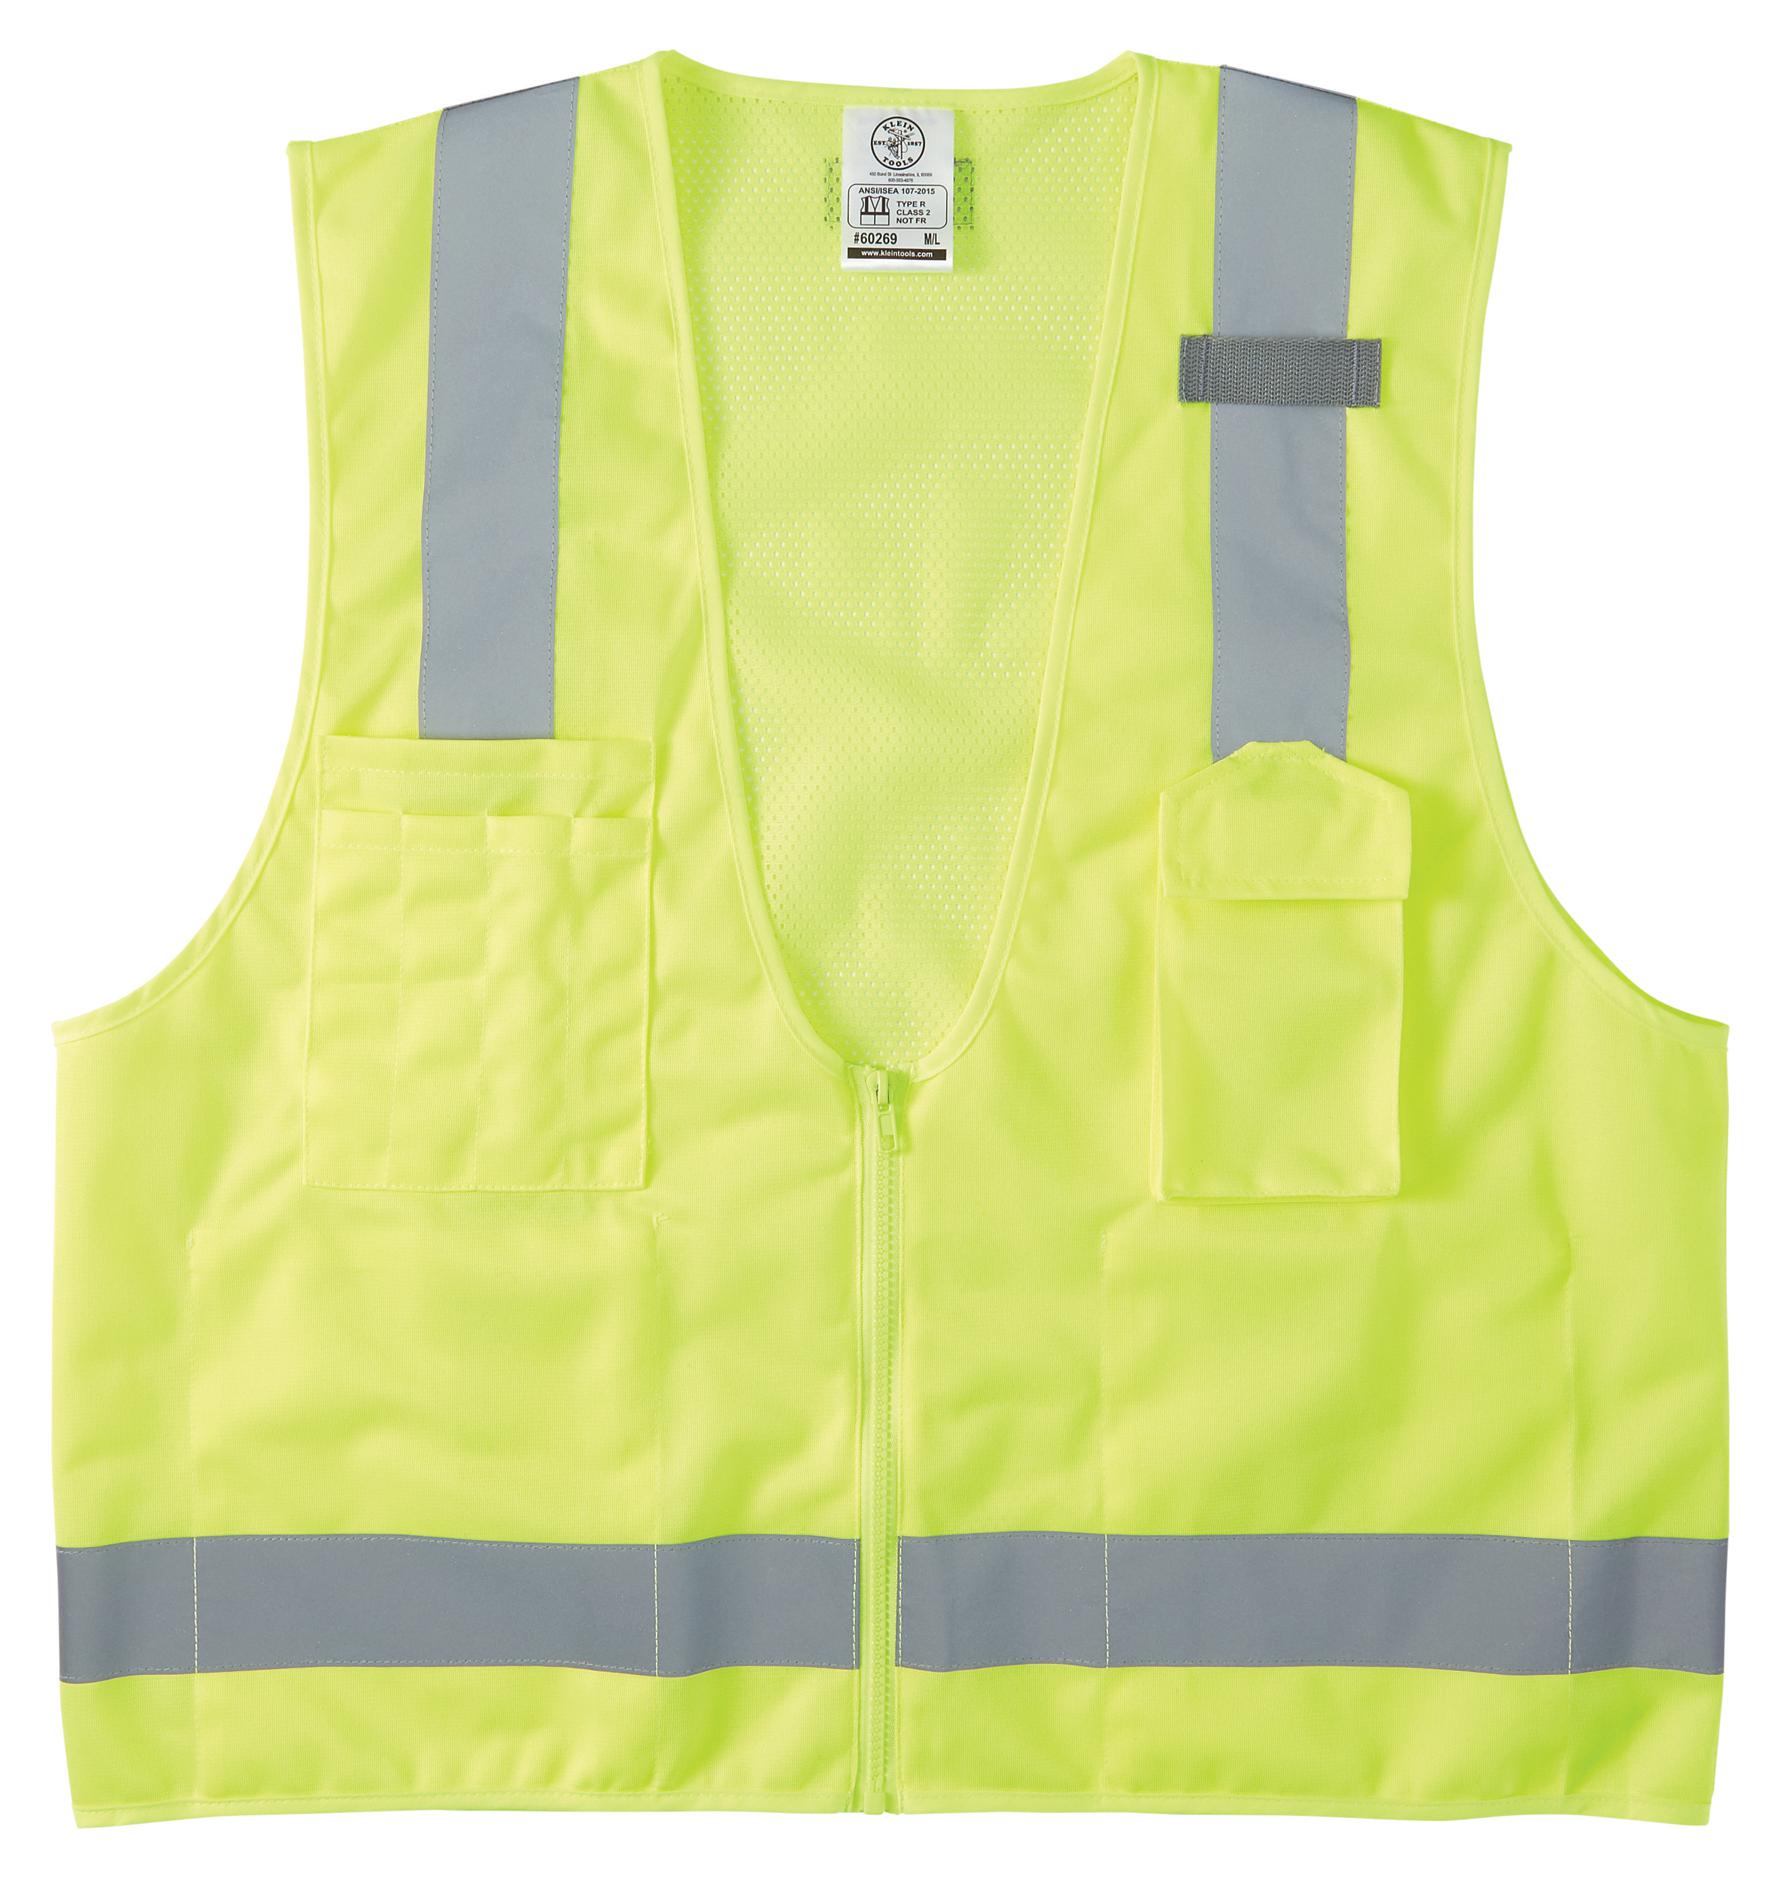 60269 HIGH-VISIBILITY SAFETY VEST, M/L KLEIN TOOLS